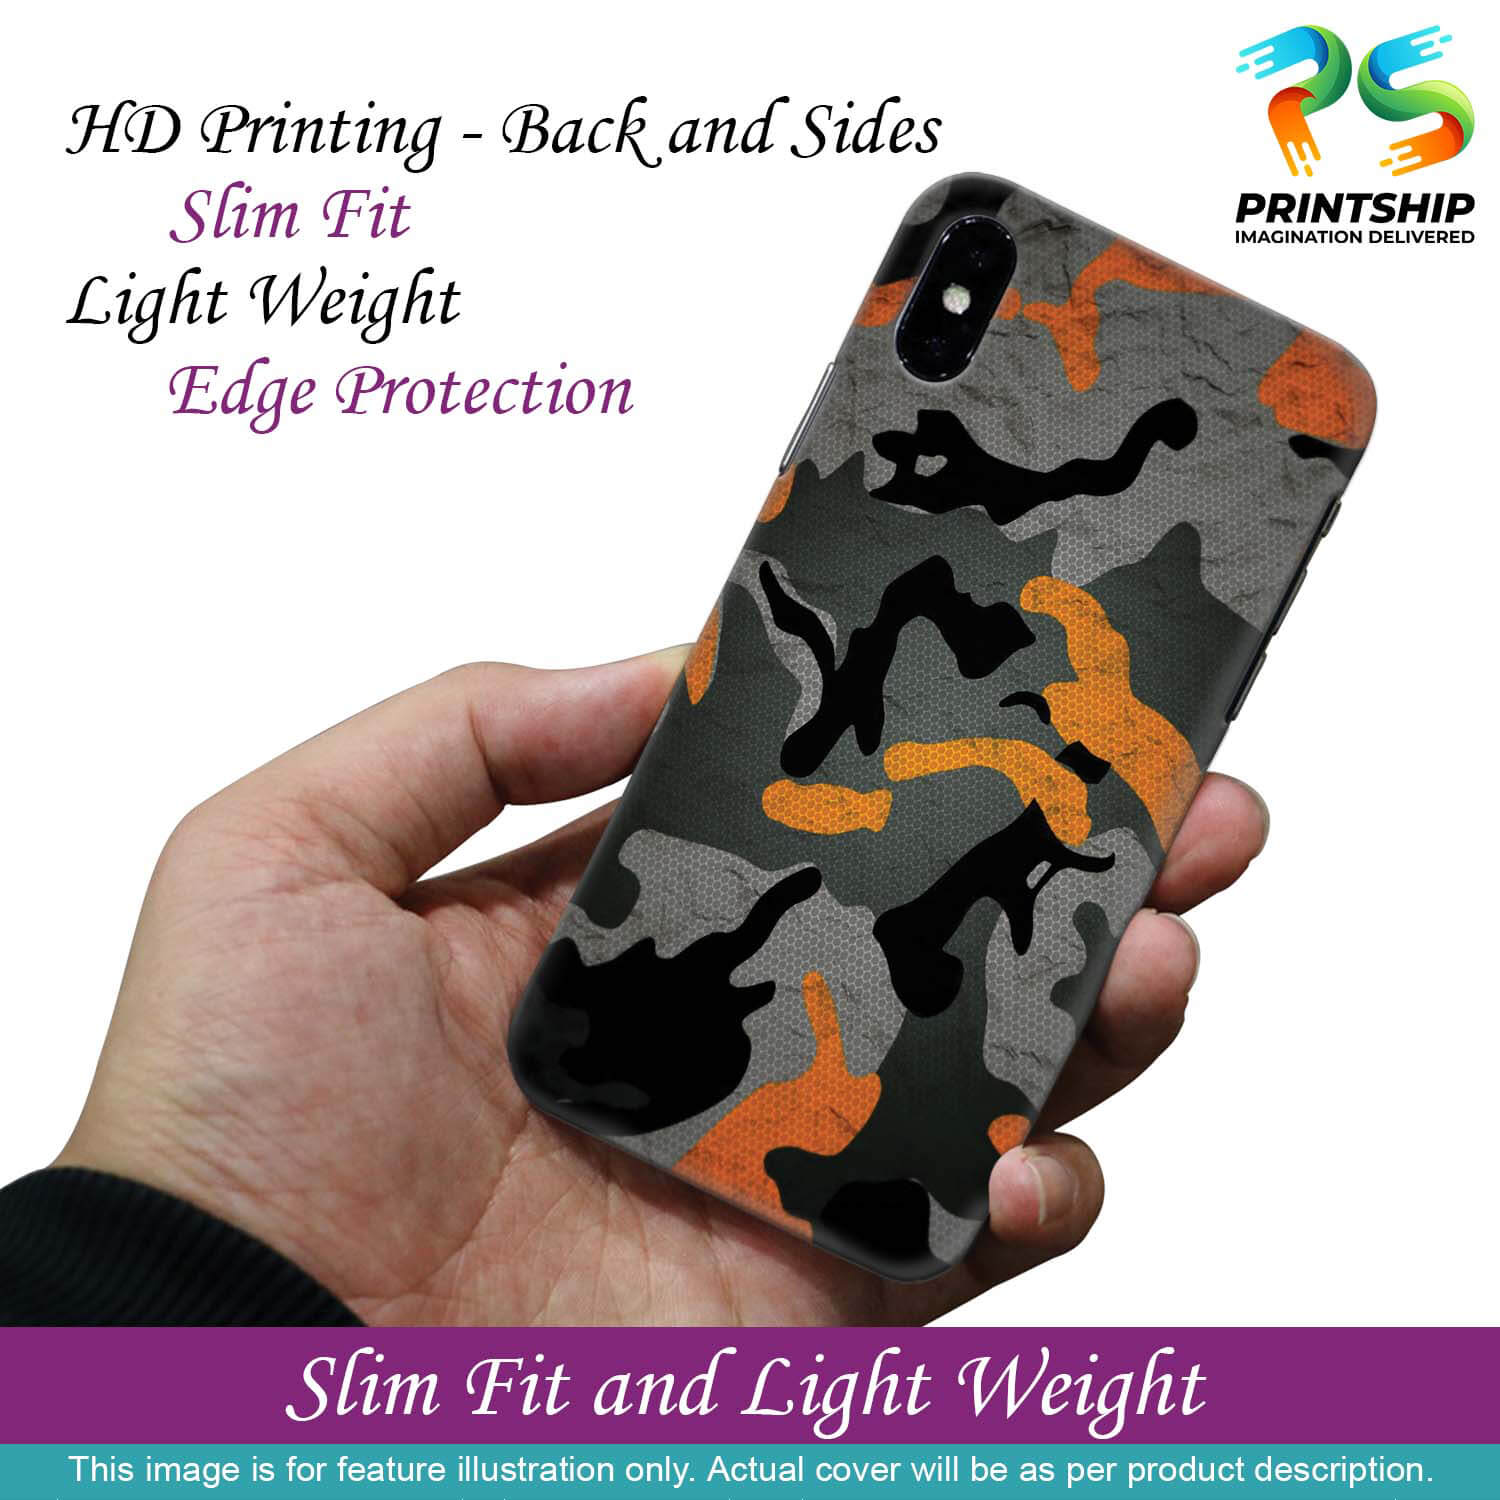 PS1337-Premium Looking Camouflage Back Cover for Samsung Galaxy A51